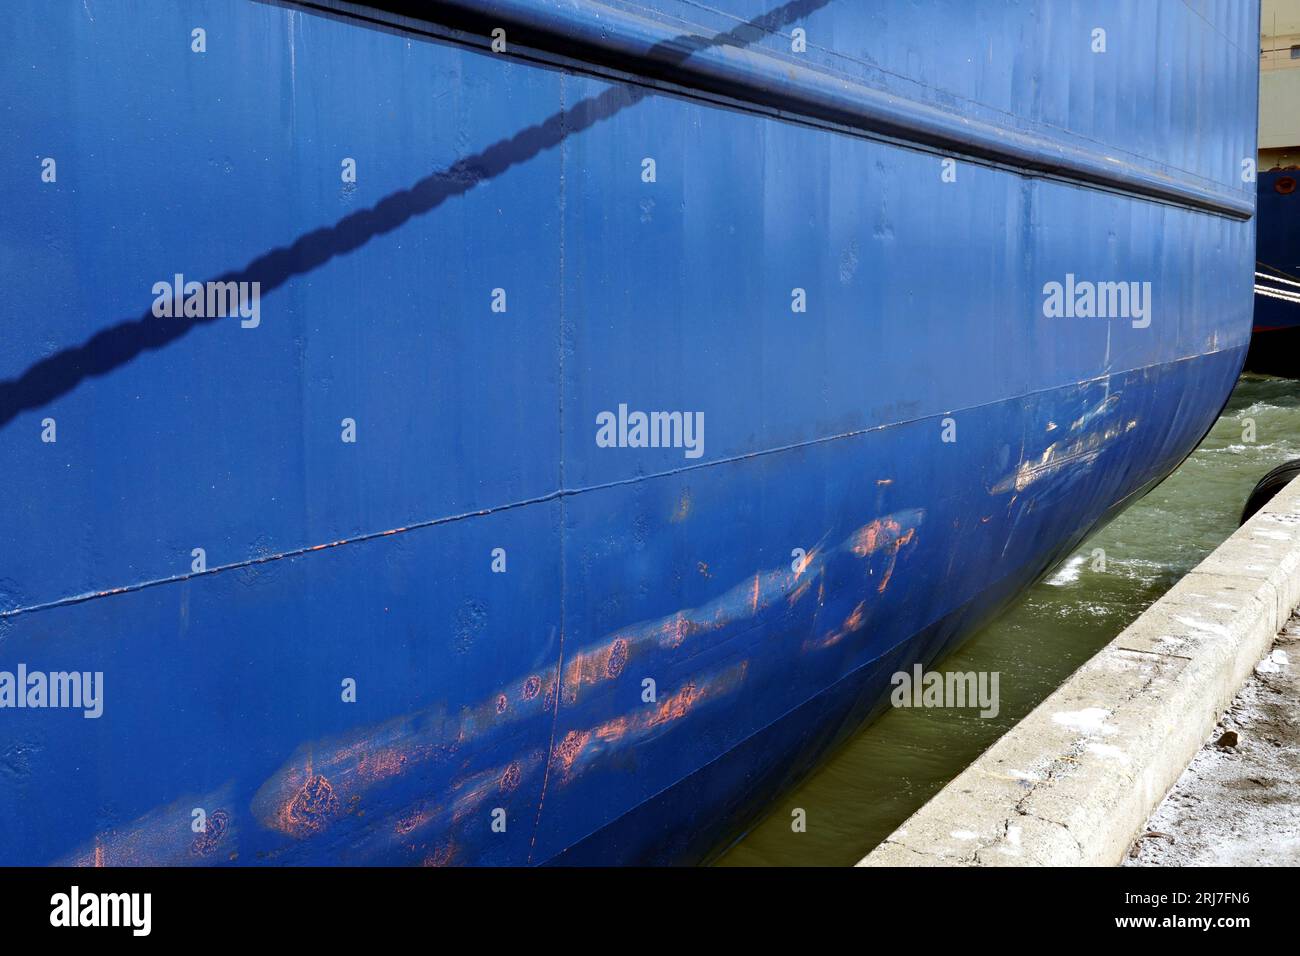 Vertical scratches and dents on the blue hull of container vessel moored in port. There are some rusty spots on the paint and copy space. Stock Photo